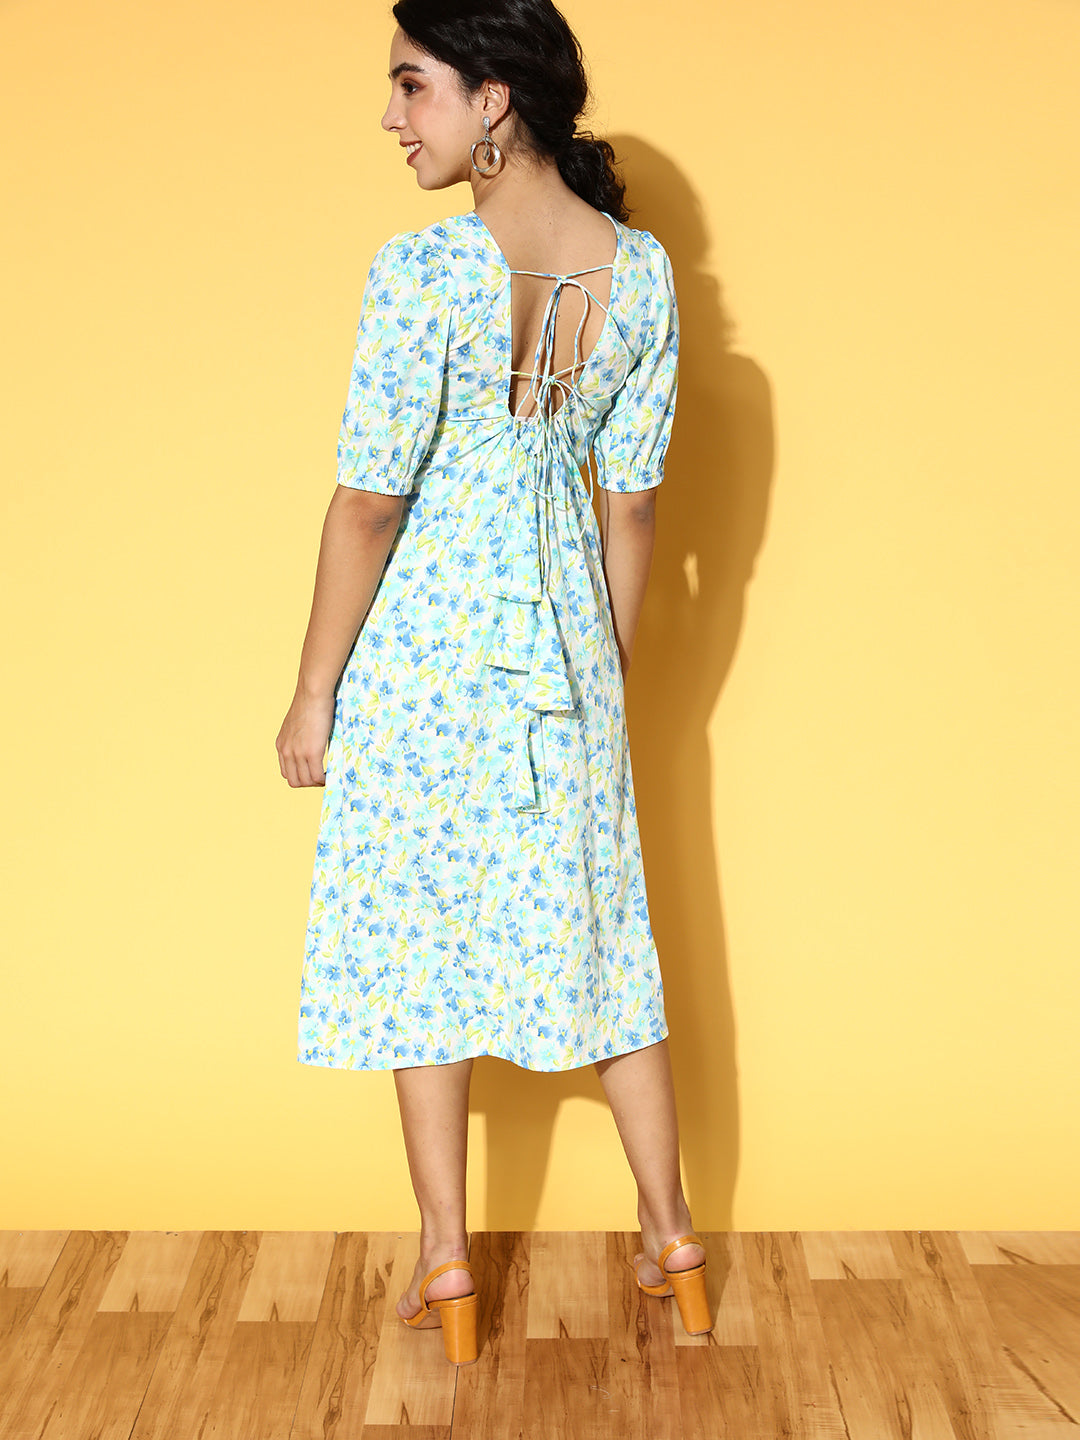 PANIT White  Blue Floral Printed Styled Back A-Line Midi Dress